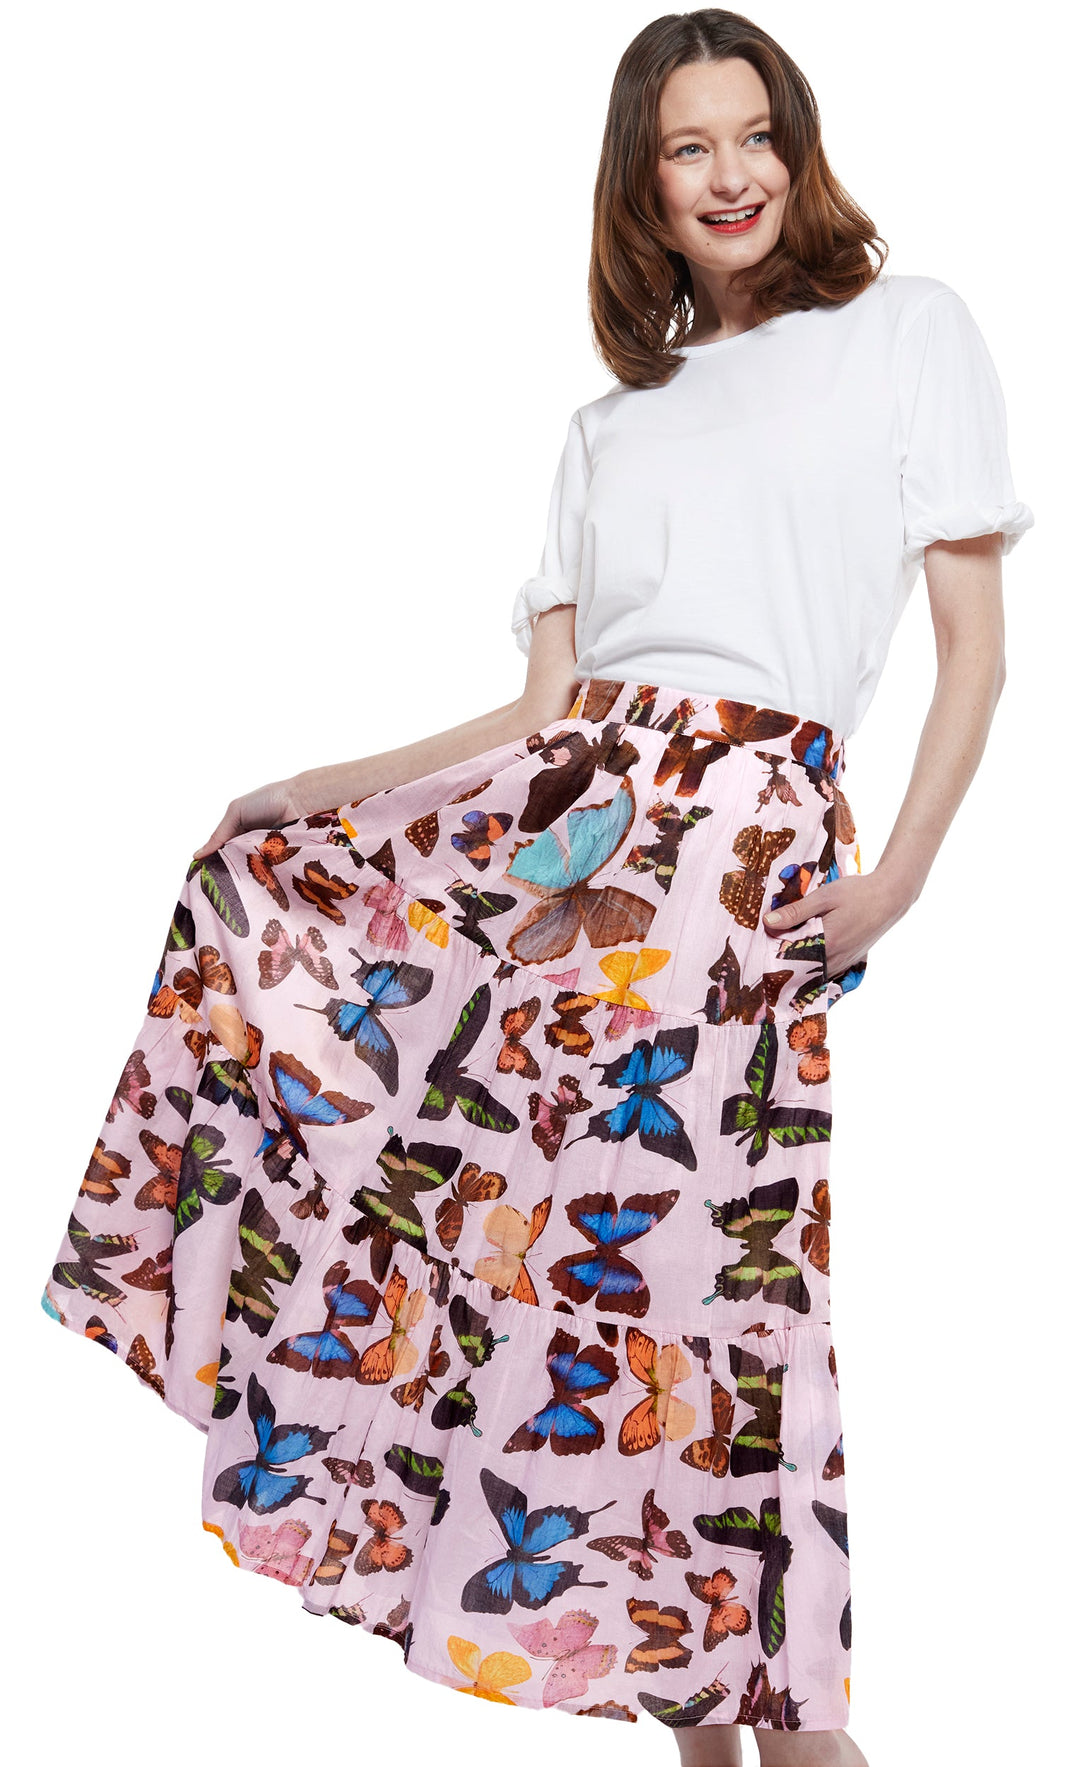 Dizzy-Lizzie Woodstock Pull-On Skirt - Pink with Butterflies